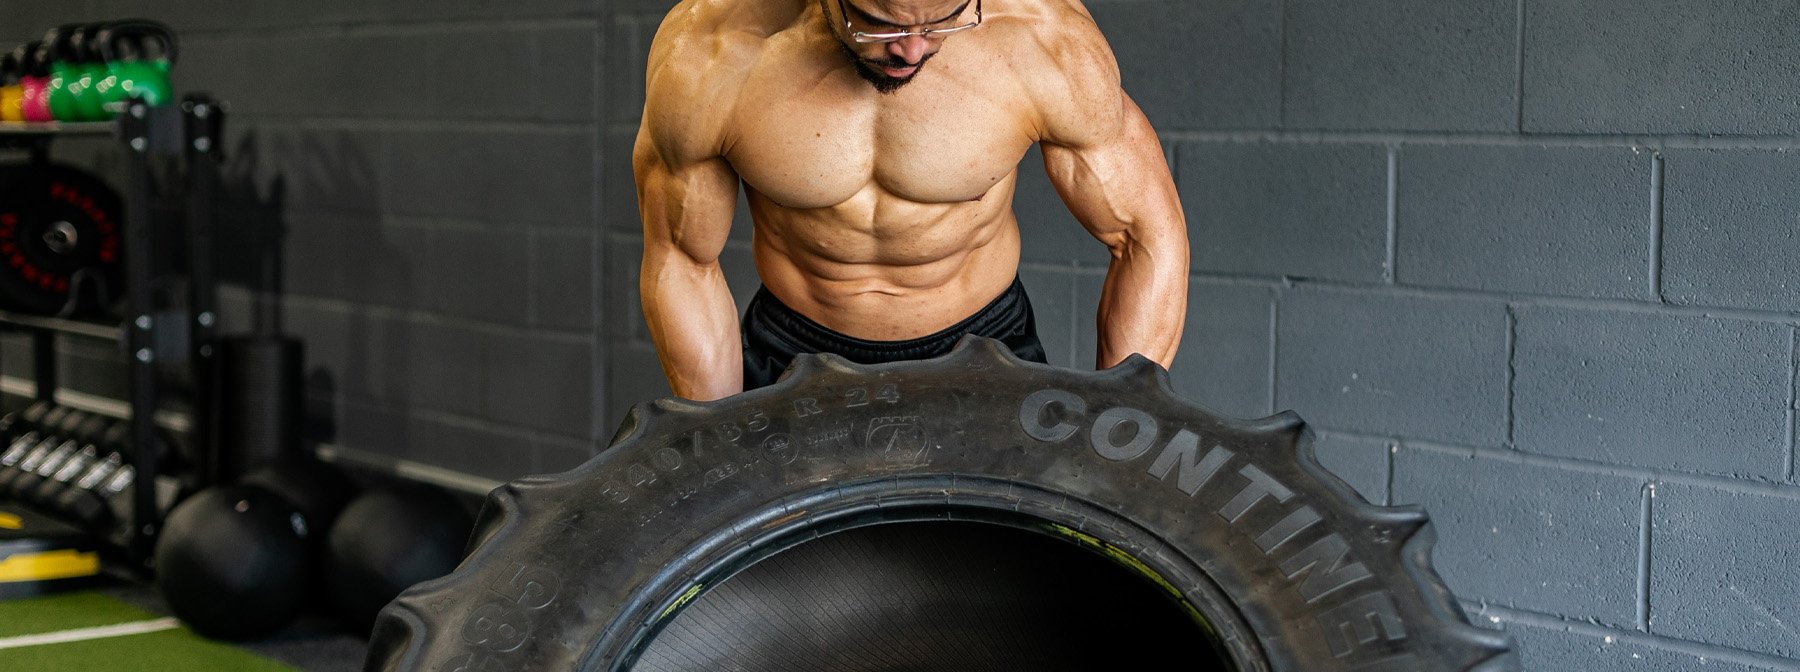 How To Train Like A Bodybuilder | Athlete guides